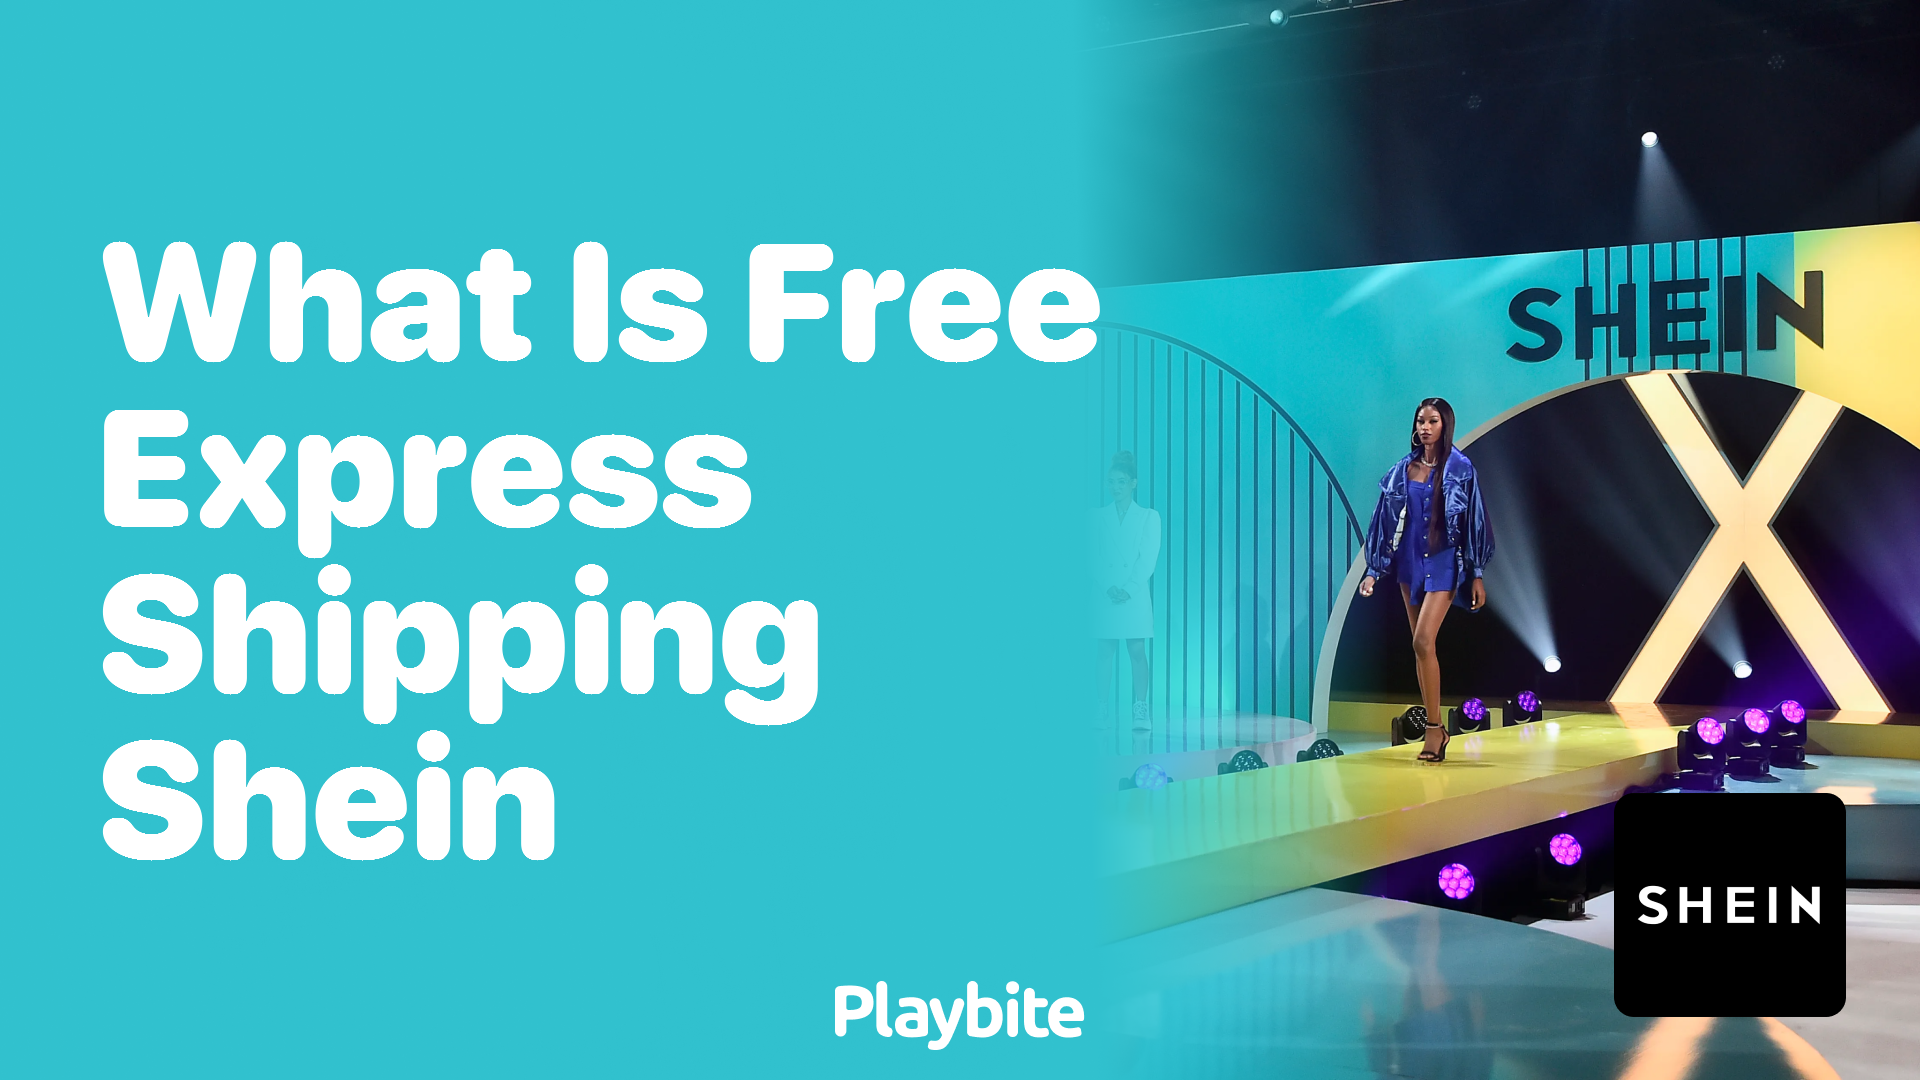 What Is Free Express Shipping on SHEIN? - Playbite